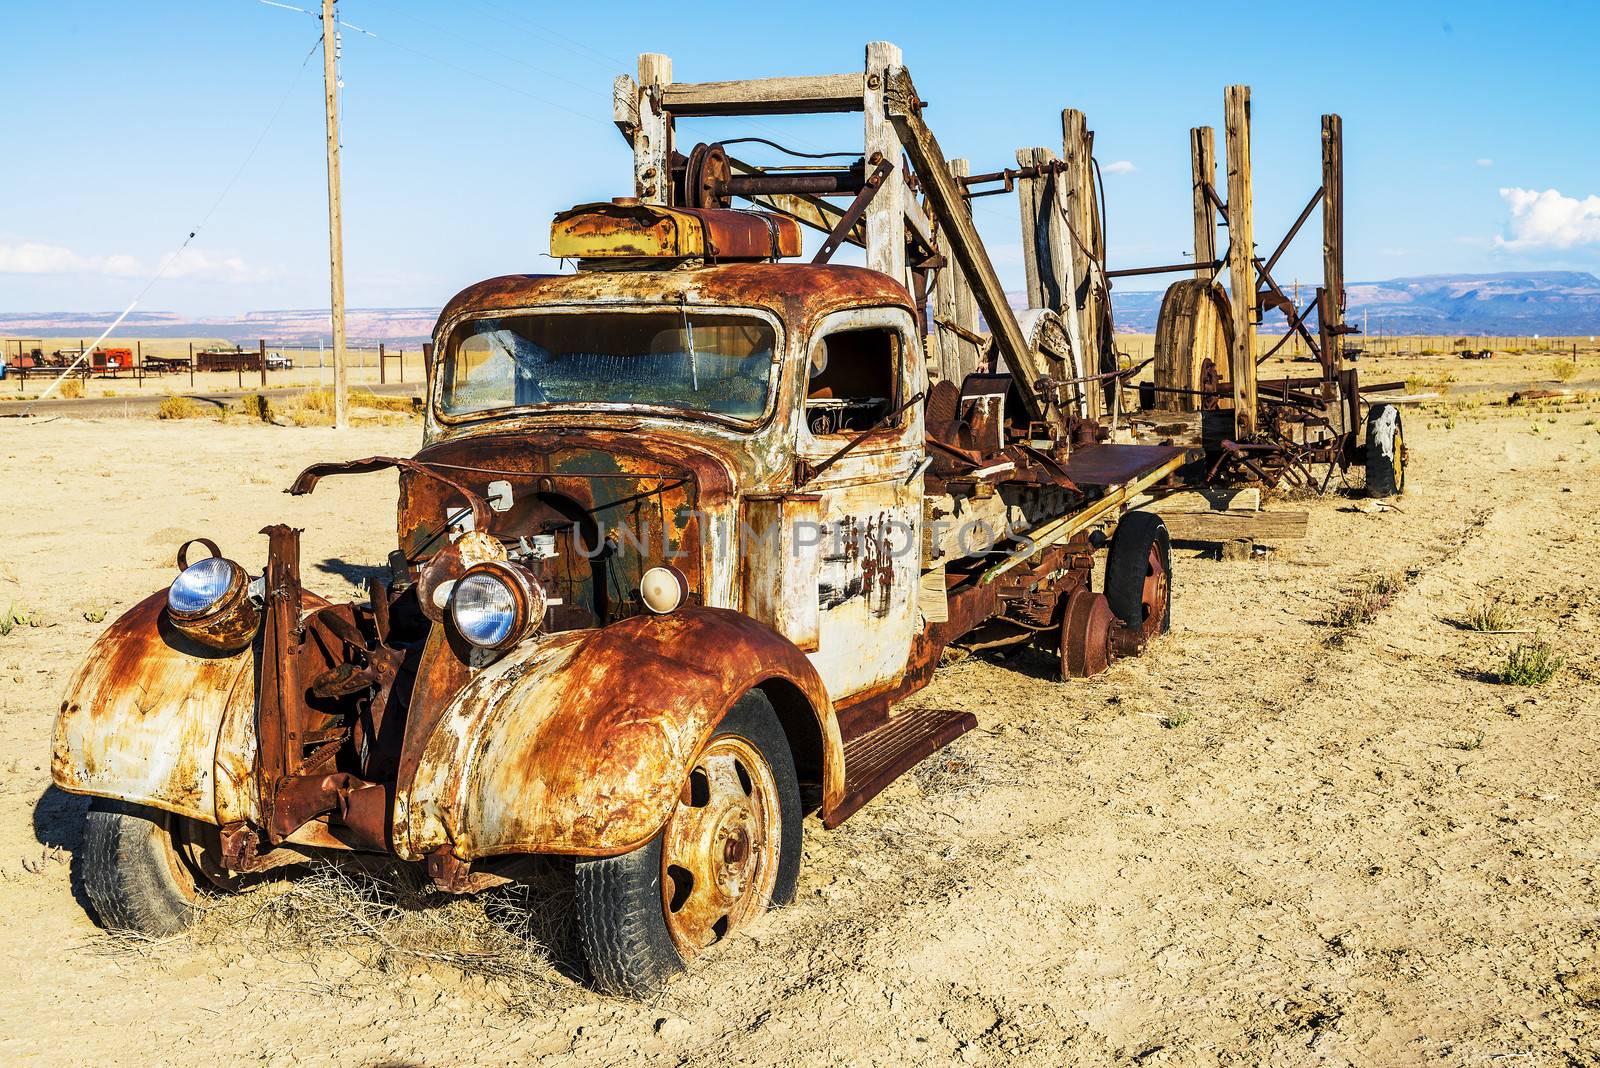 vintage truck abandoned and rusting away in the desert, ghost town in the background 